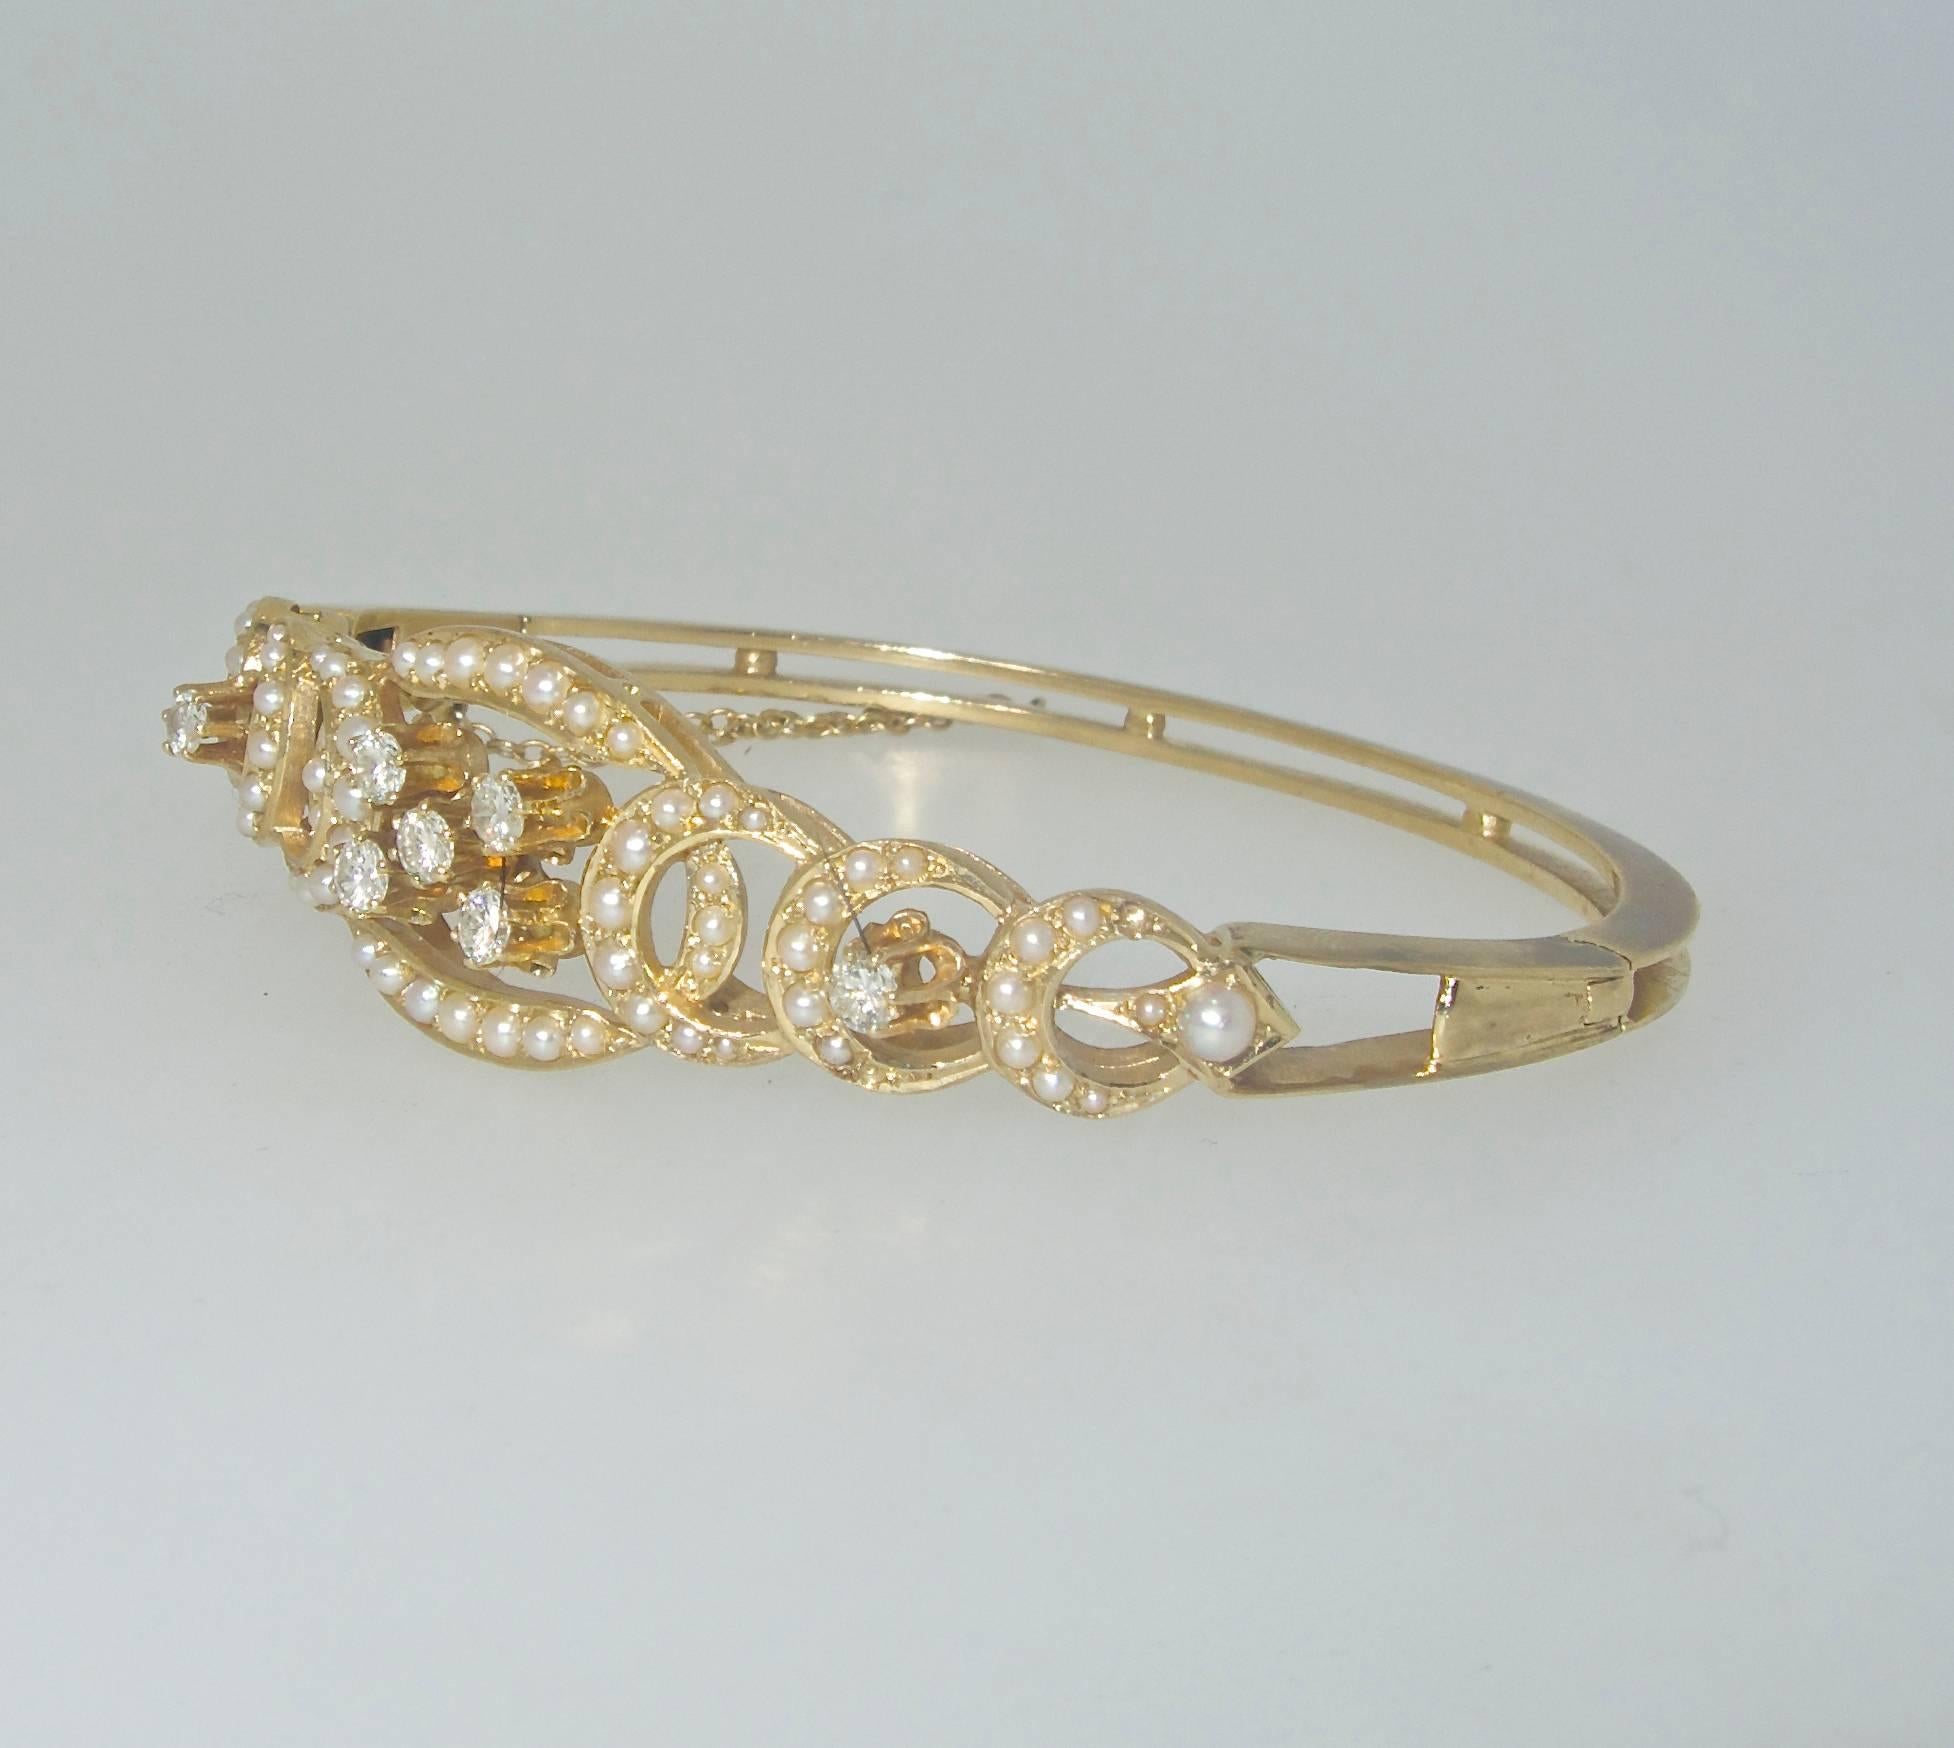 Small seed pearls and diamonds are set into this gold bangle bracelet, it is marked 14K and has the maker's initials KGJ.  There are 68 natural small pearls and 7 round brilliant cut diamonds which weigh approximately .70 cts.  The bracelet is